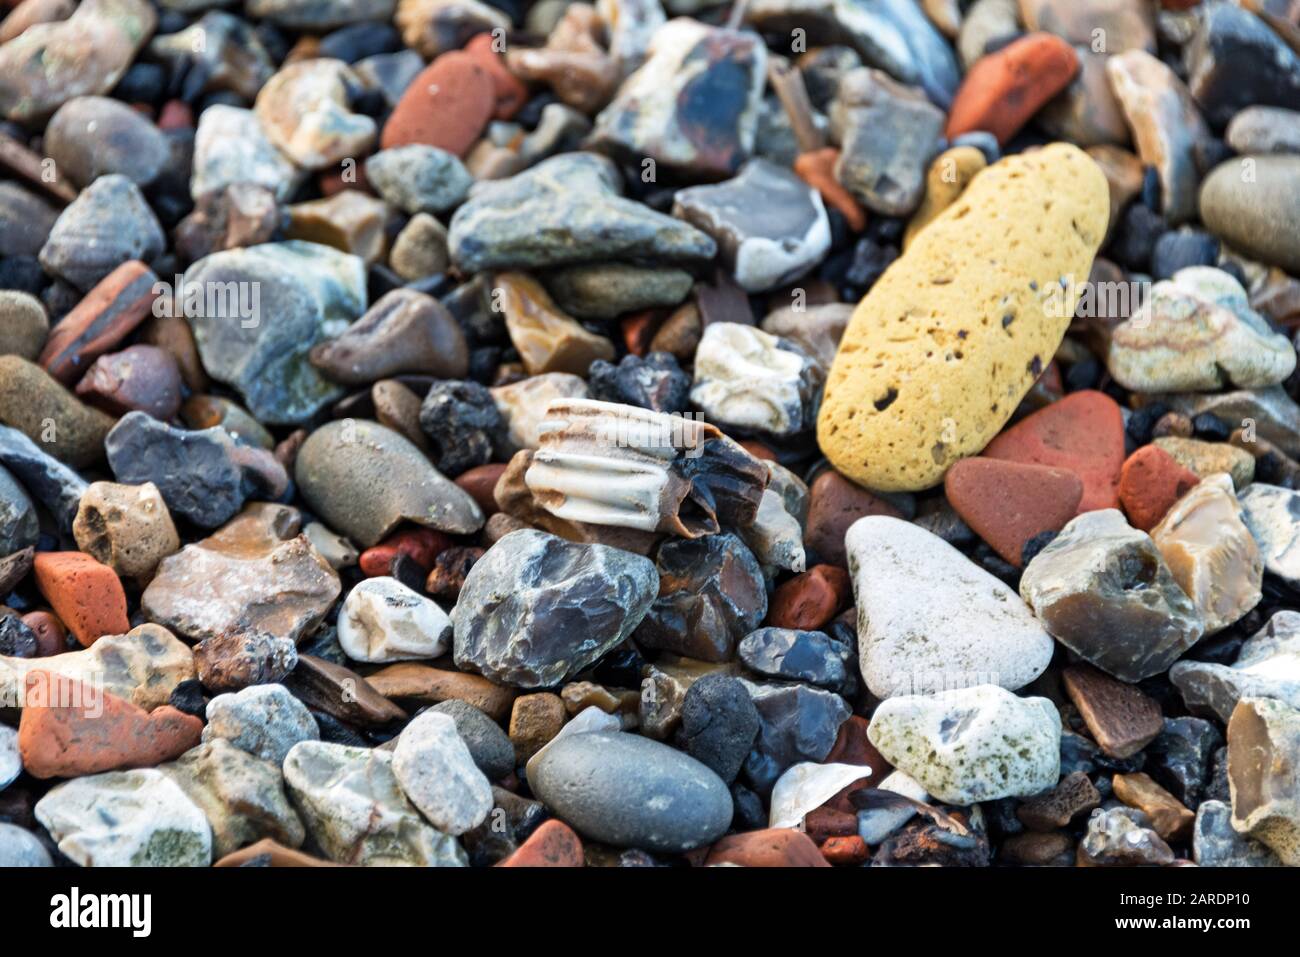 Herbivore tooth and yellow brick lying among fragments of brick, flint, chalk, and river stones, Greenwich, London. Stock Photo